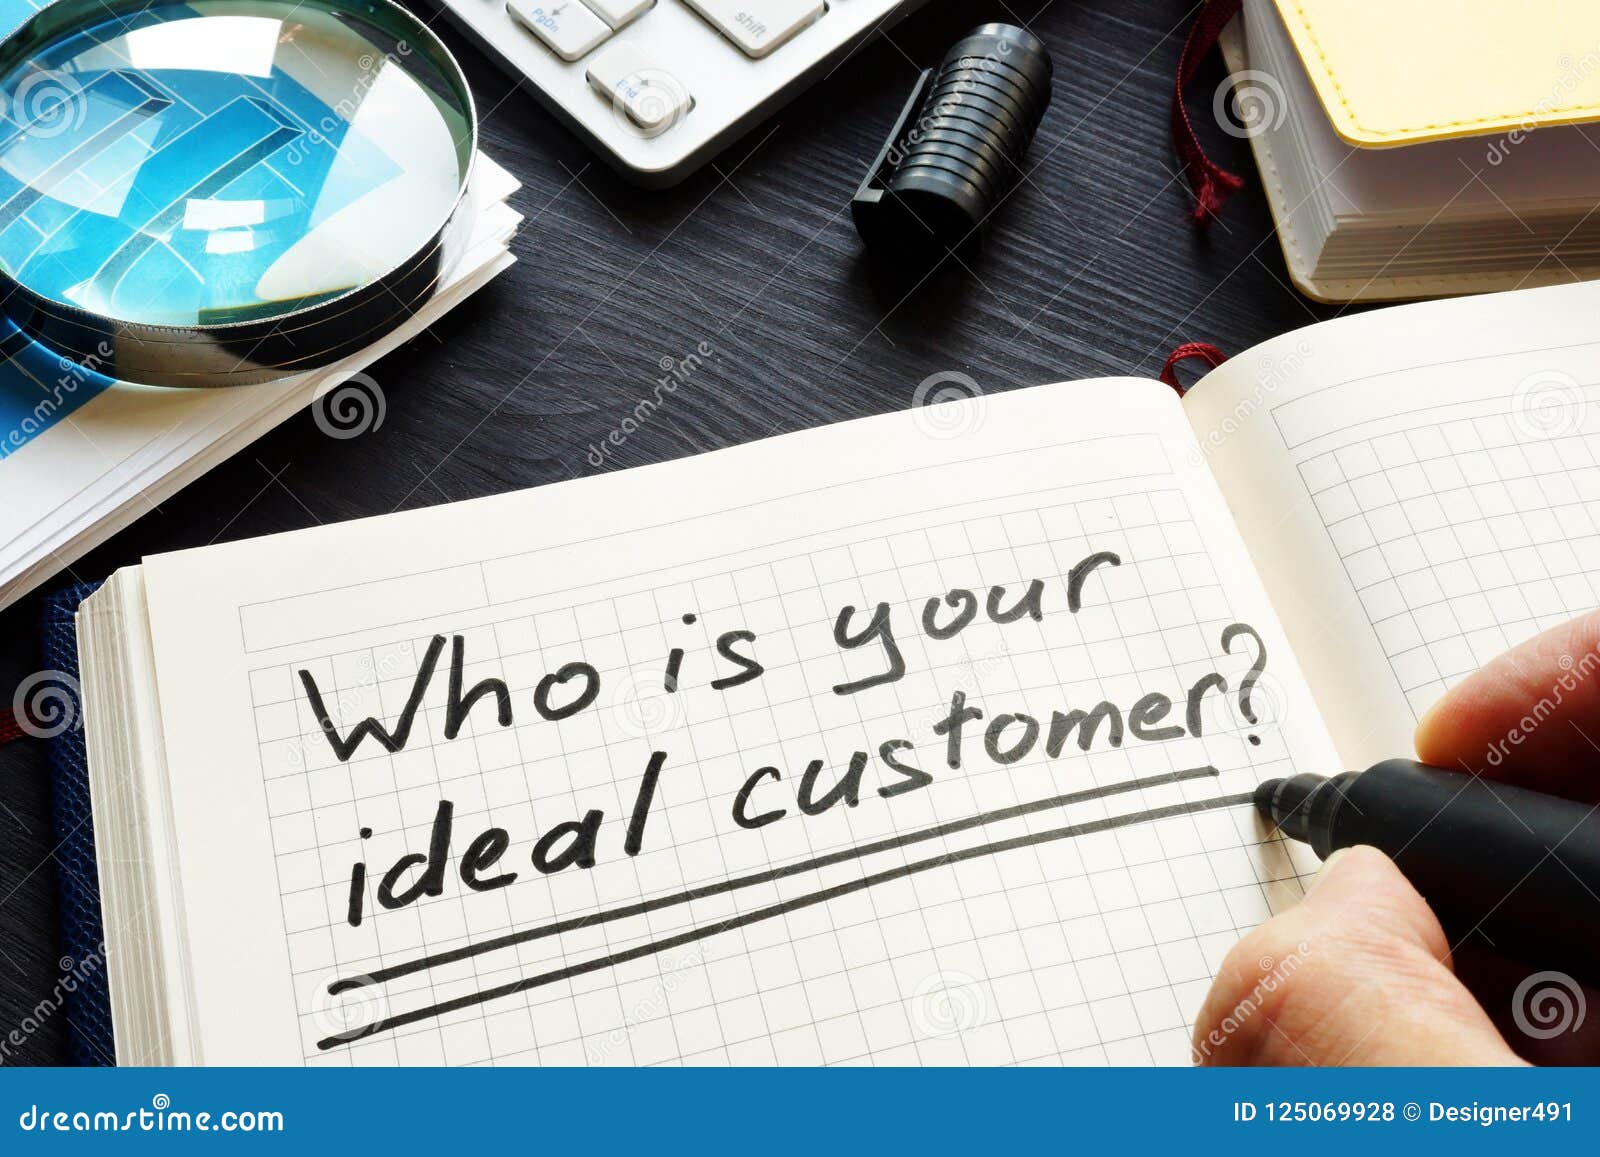 who is your ideal customer handwritten in a note. loyalty and satisfaction.